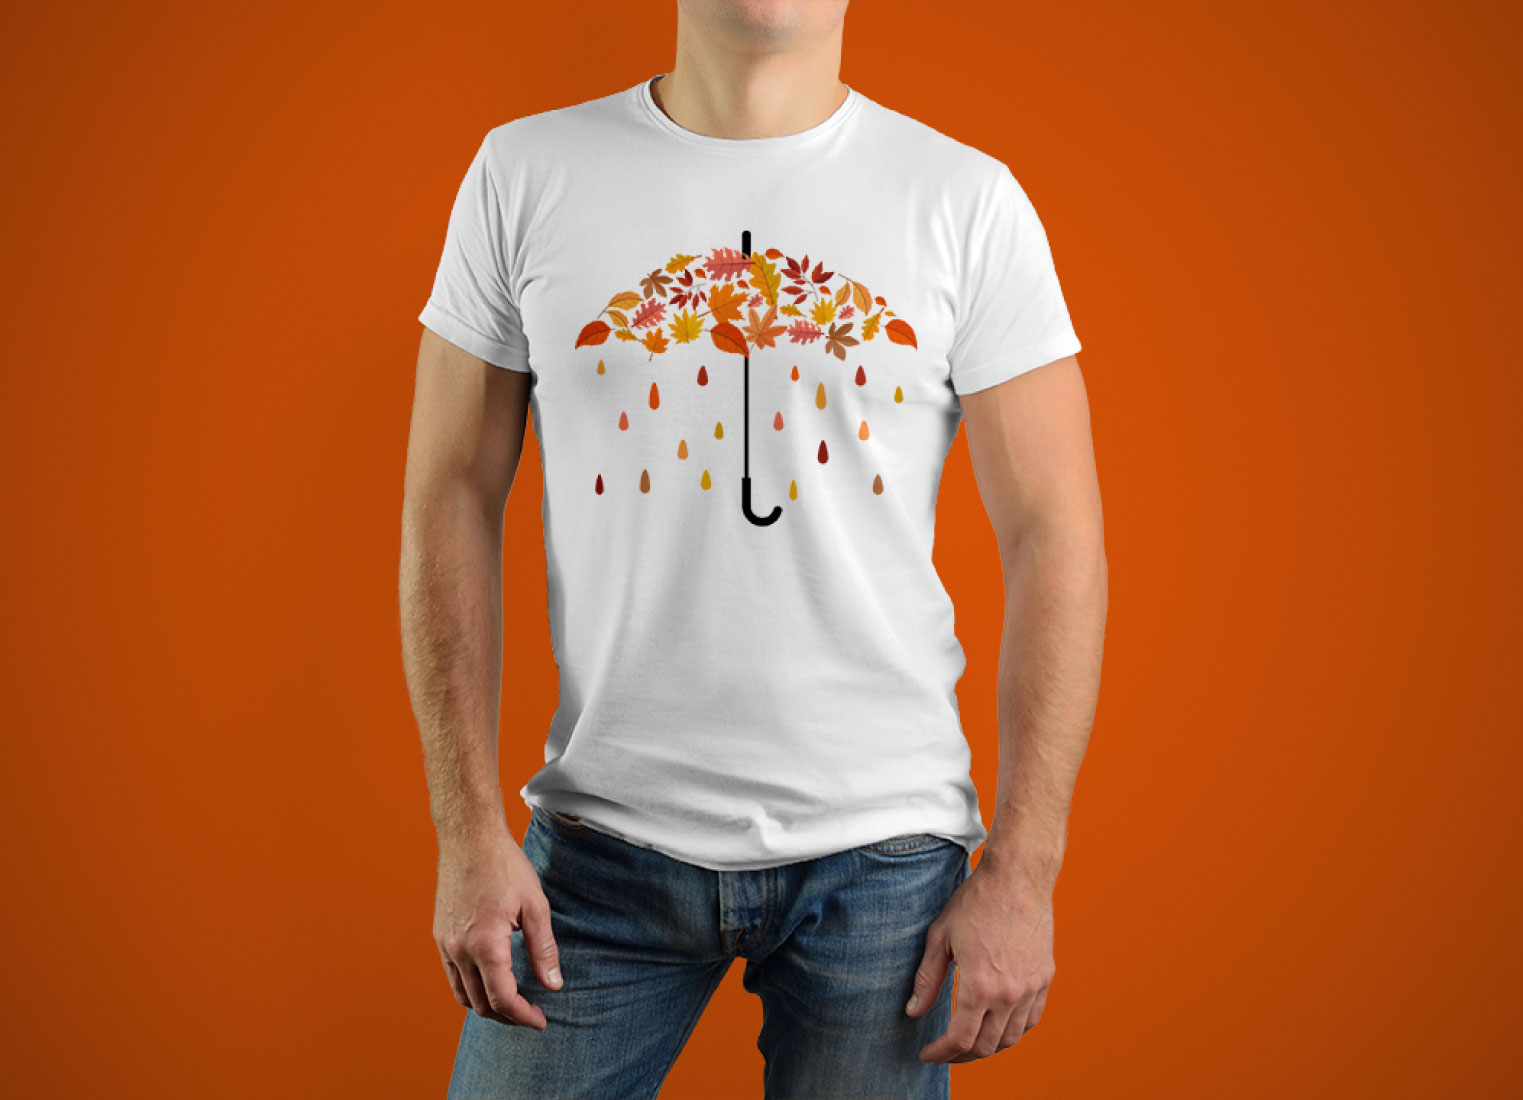 autumn leaves umbrella with faling colorful drops tshirt design 761